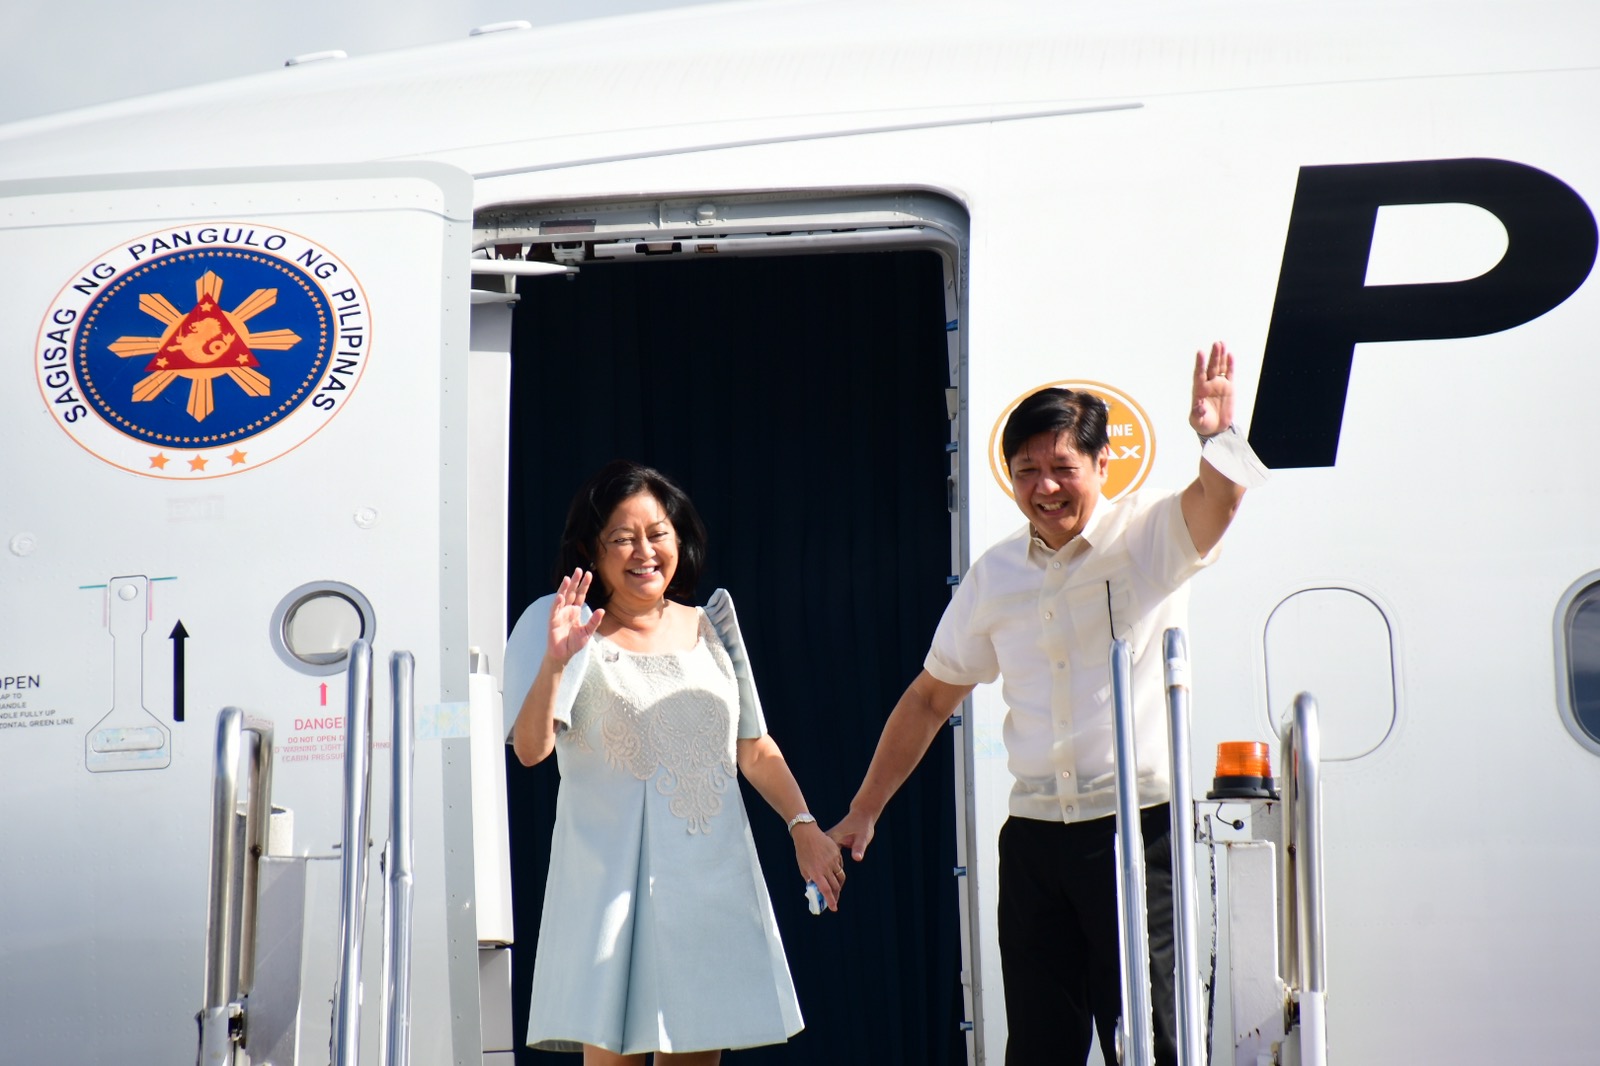 PBBM departs for Bangkok, Thailand to join fellow world leaders for the APEC Economic Leaders’ Meeting